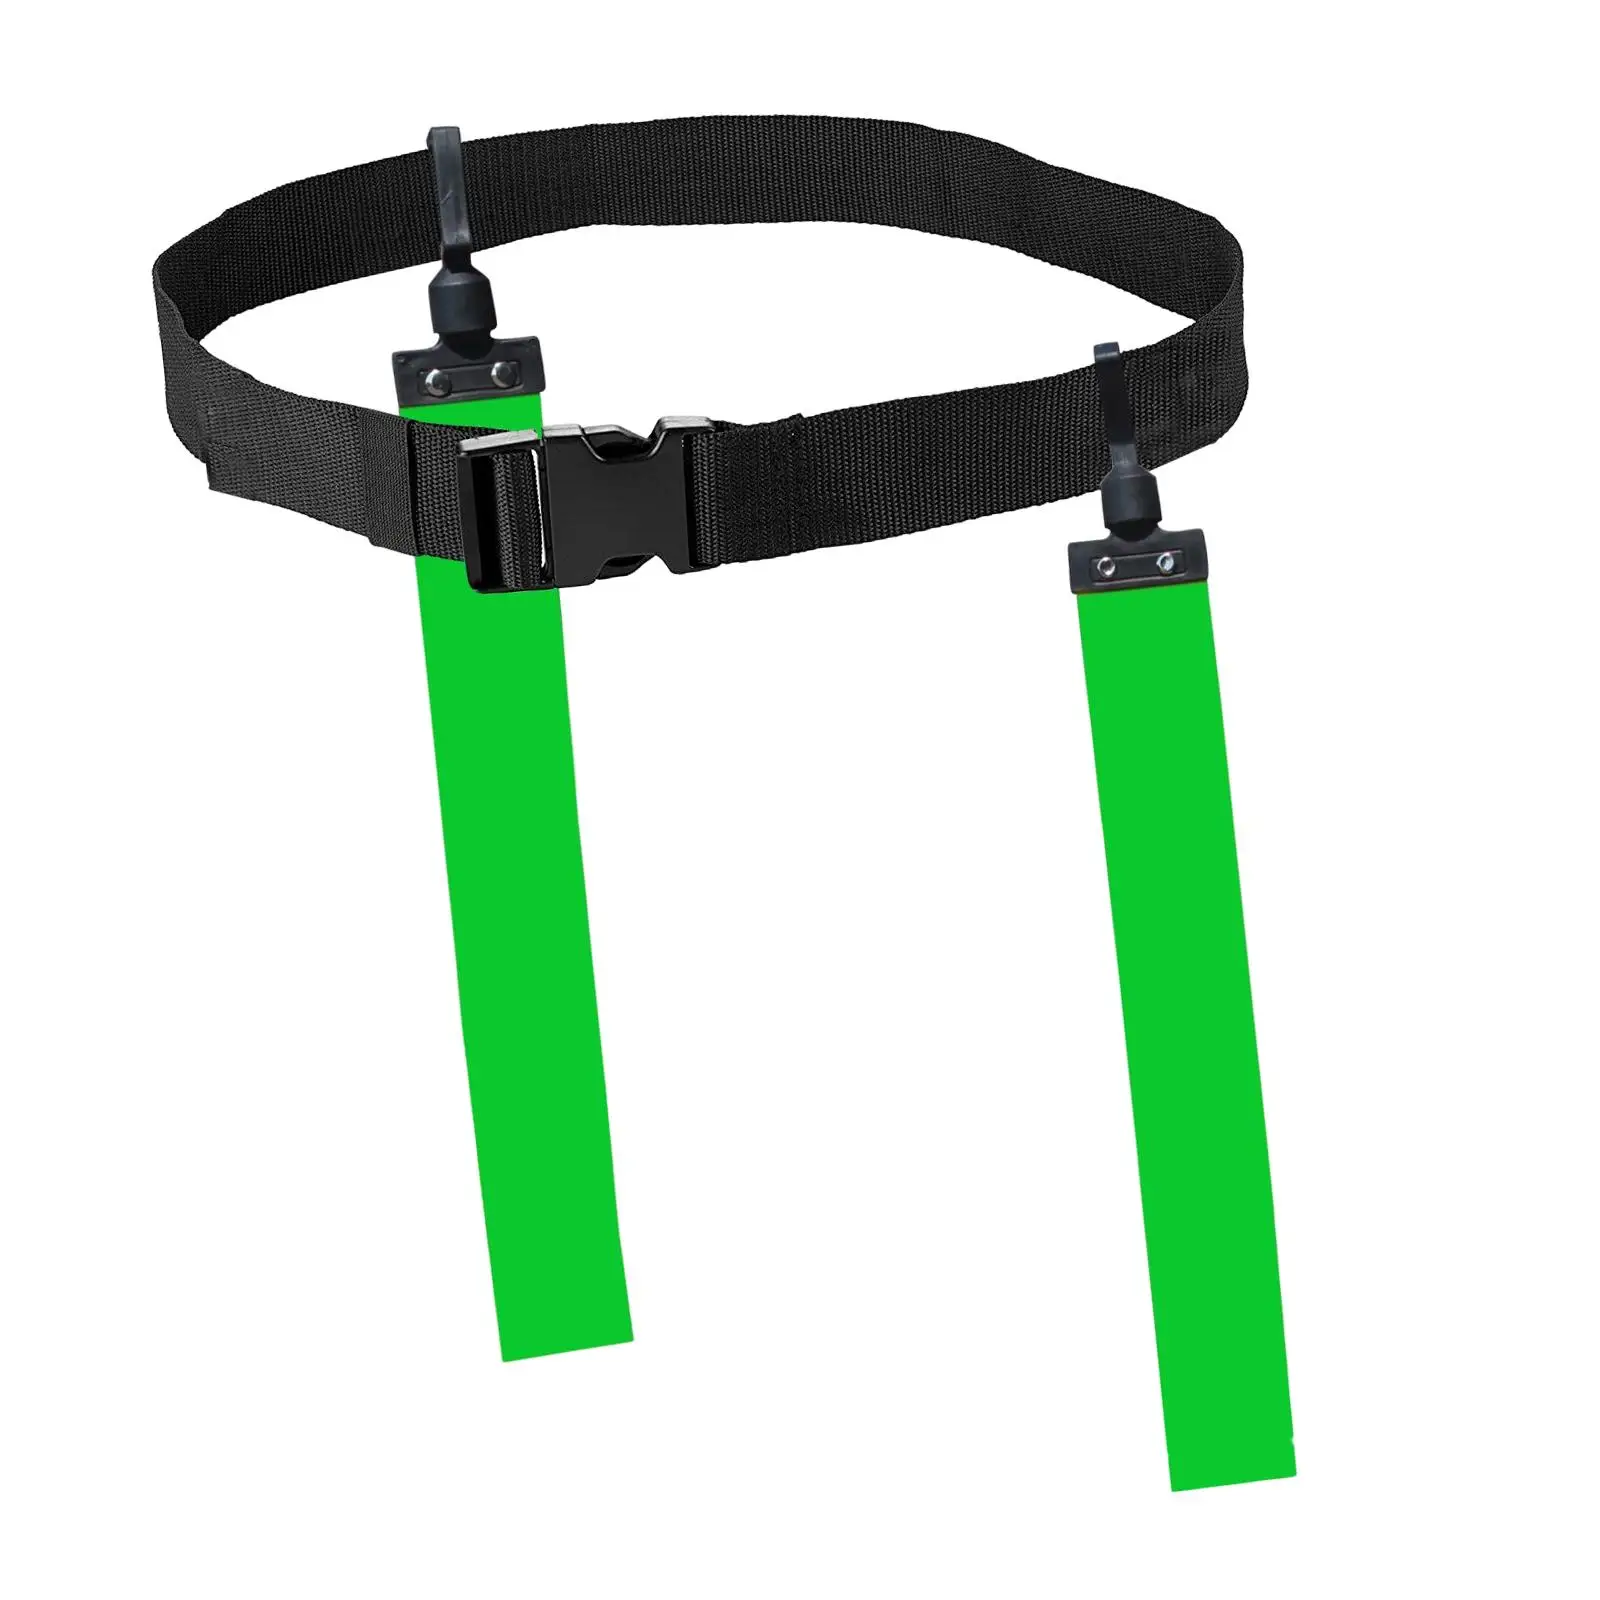 Durable Football Belt Soccer Belt for Sports Players Adults and